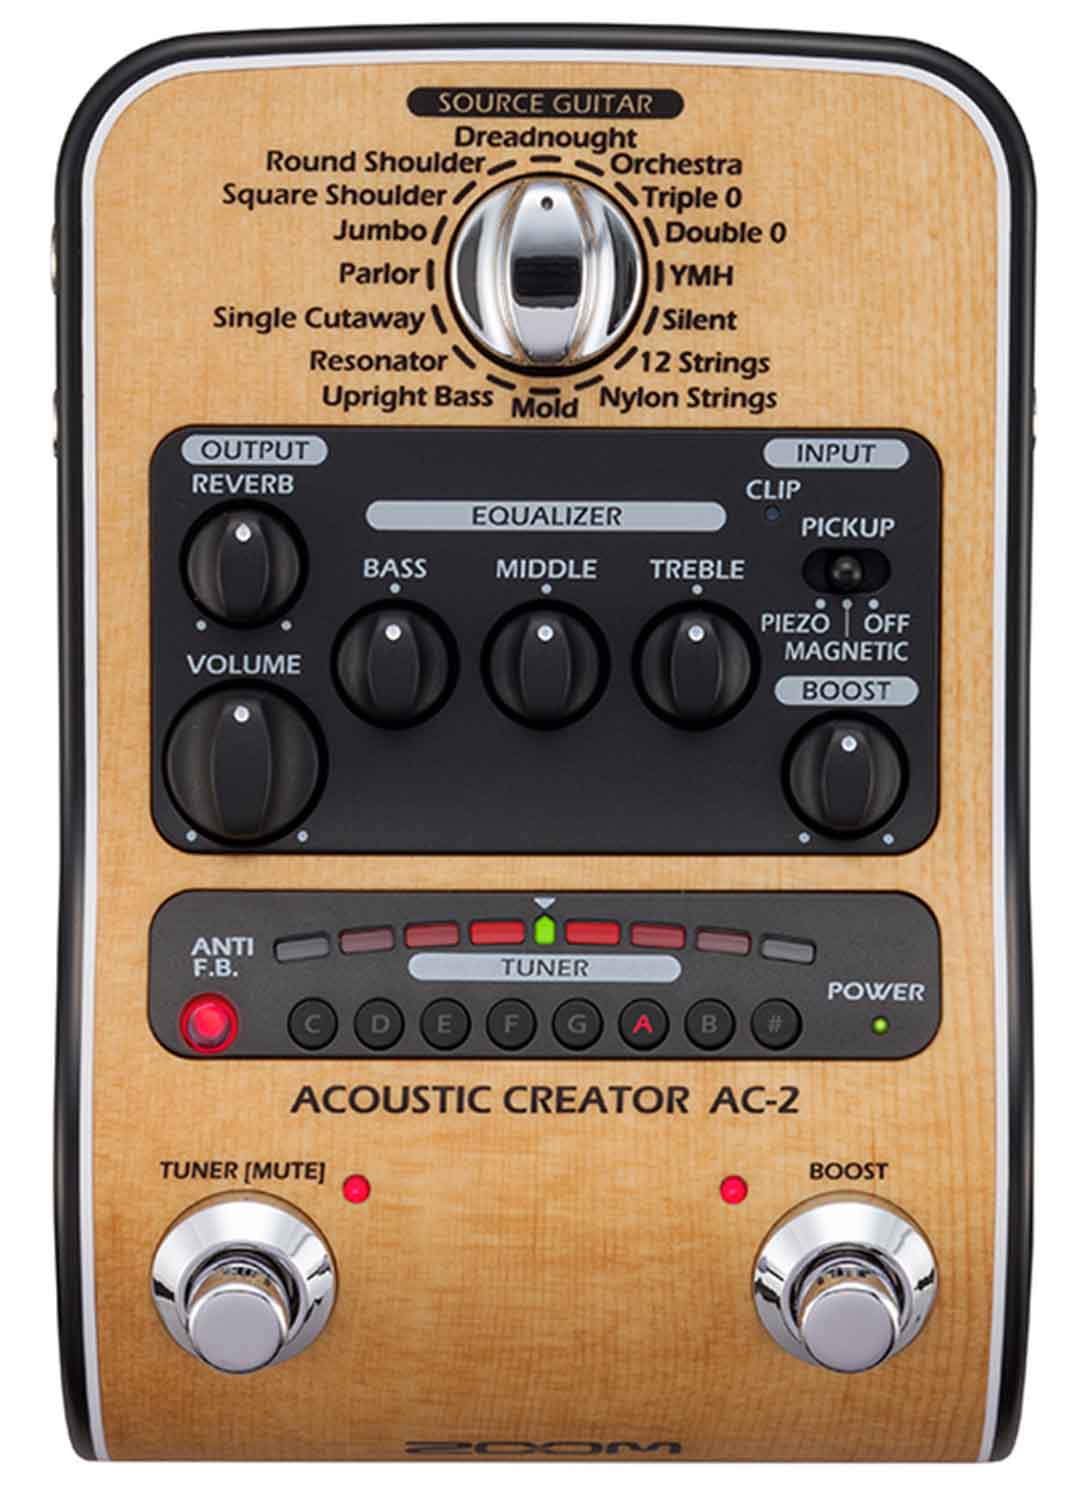 B-Stock: Zoom AC-2 Acoustic Creator Direct Box with 16 Source Guitars - Hollywood DJ